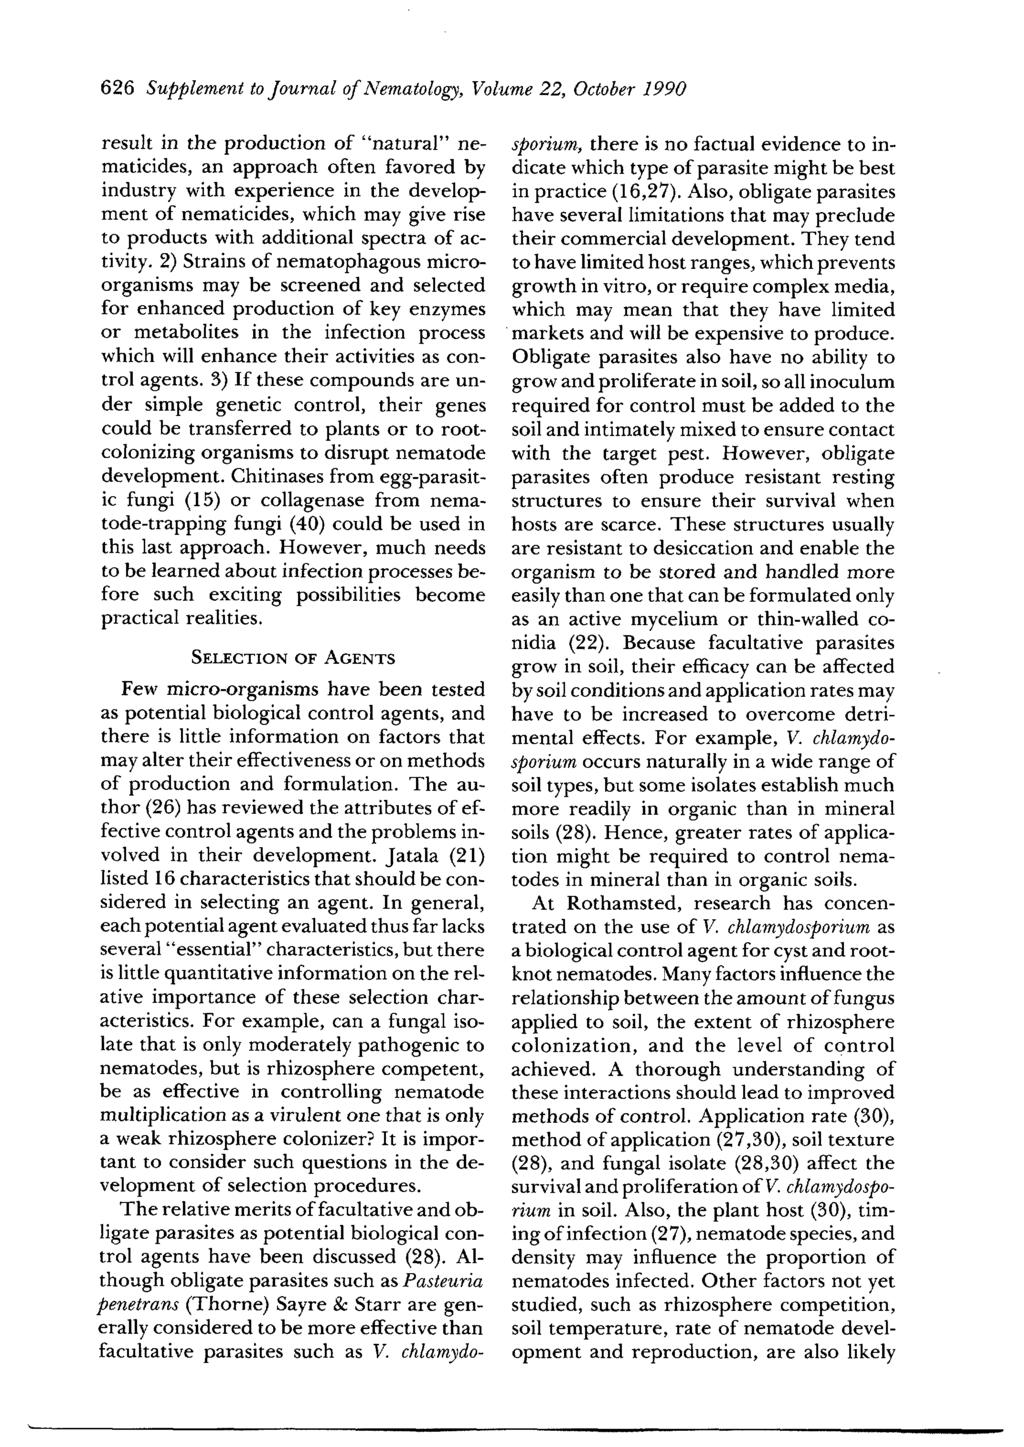 626 Supplement to Journal of Nematology, Volume 22, October 1990 result in the production of "natural" nematicides, an approach often favored by industry with experience in the development of